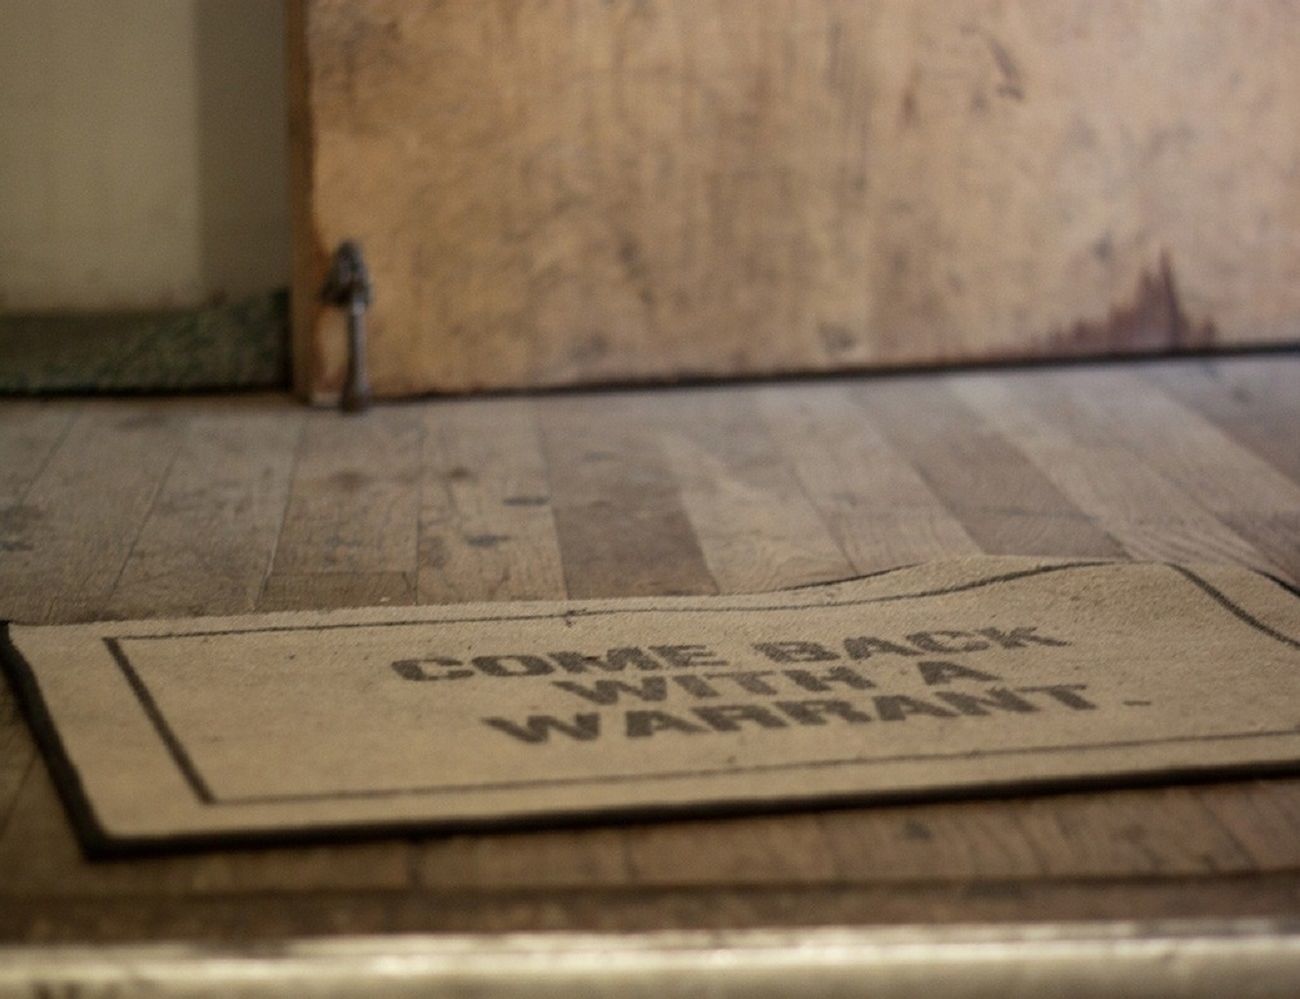 Come Back With A Warrant Doormat